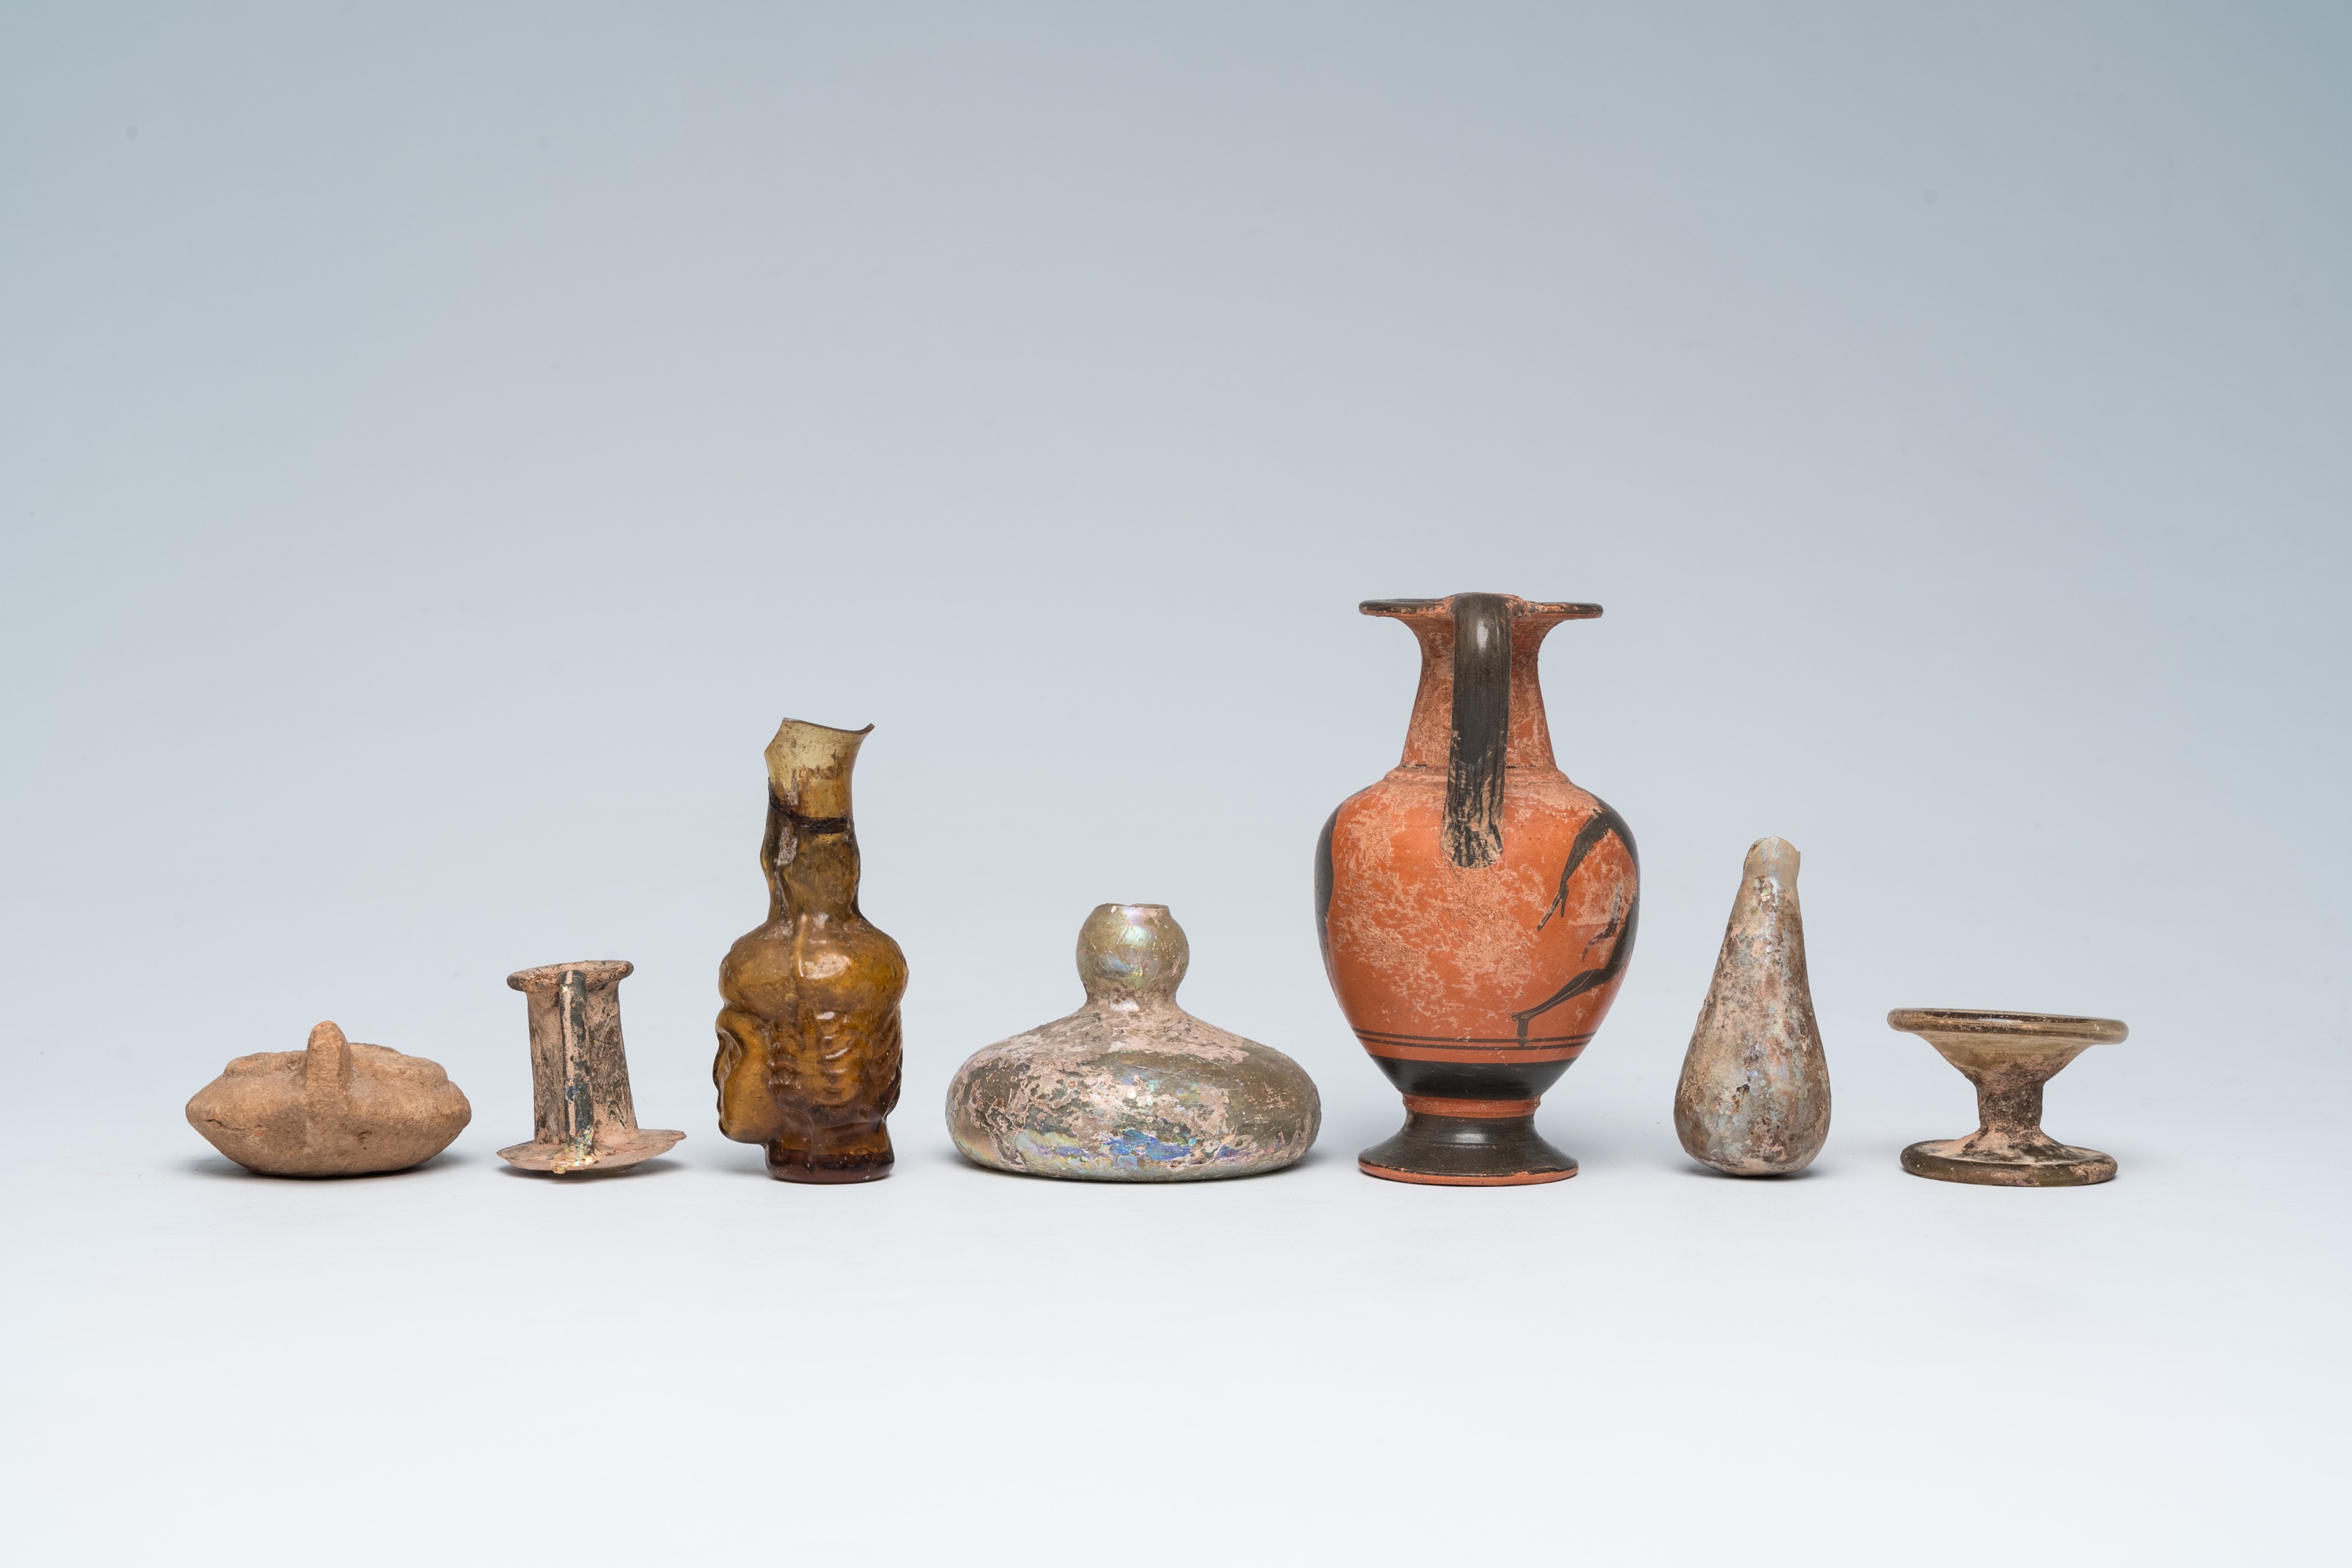 A varied collection of archaeological glass and pottery utensils and fragments, Greco-Roman period a - Image 5 of 7